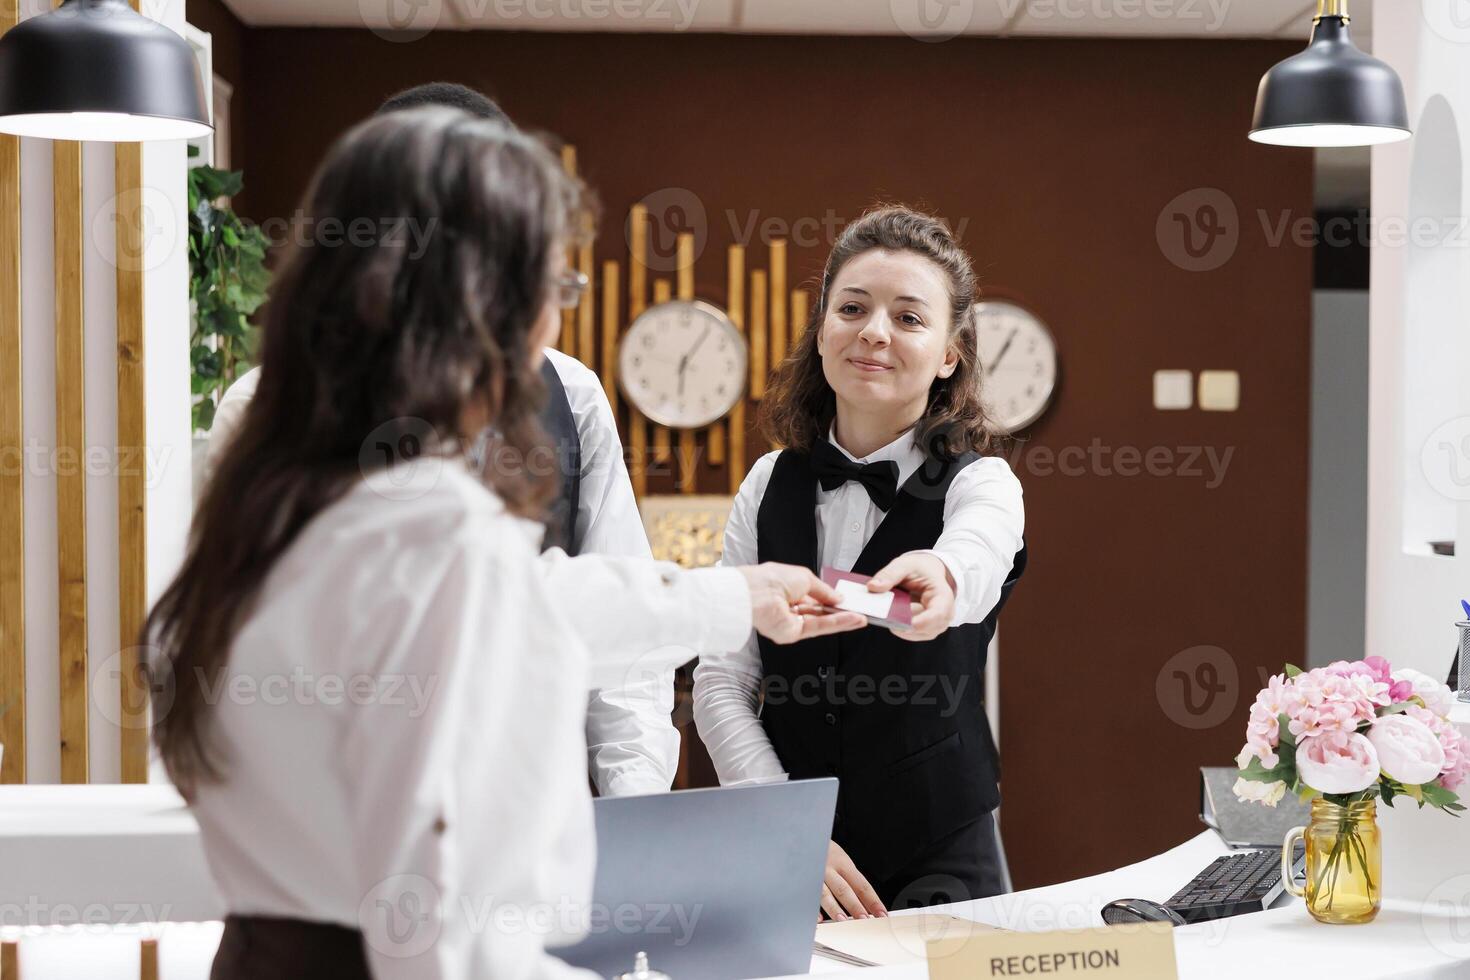 Female concierge eagerly welcomes and assists elderly traveler, checks identification for seamless check-in. At front desk, hotel receptionist returns passport to senior woman after verification. photo